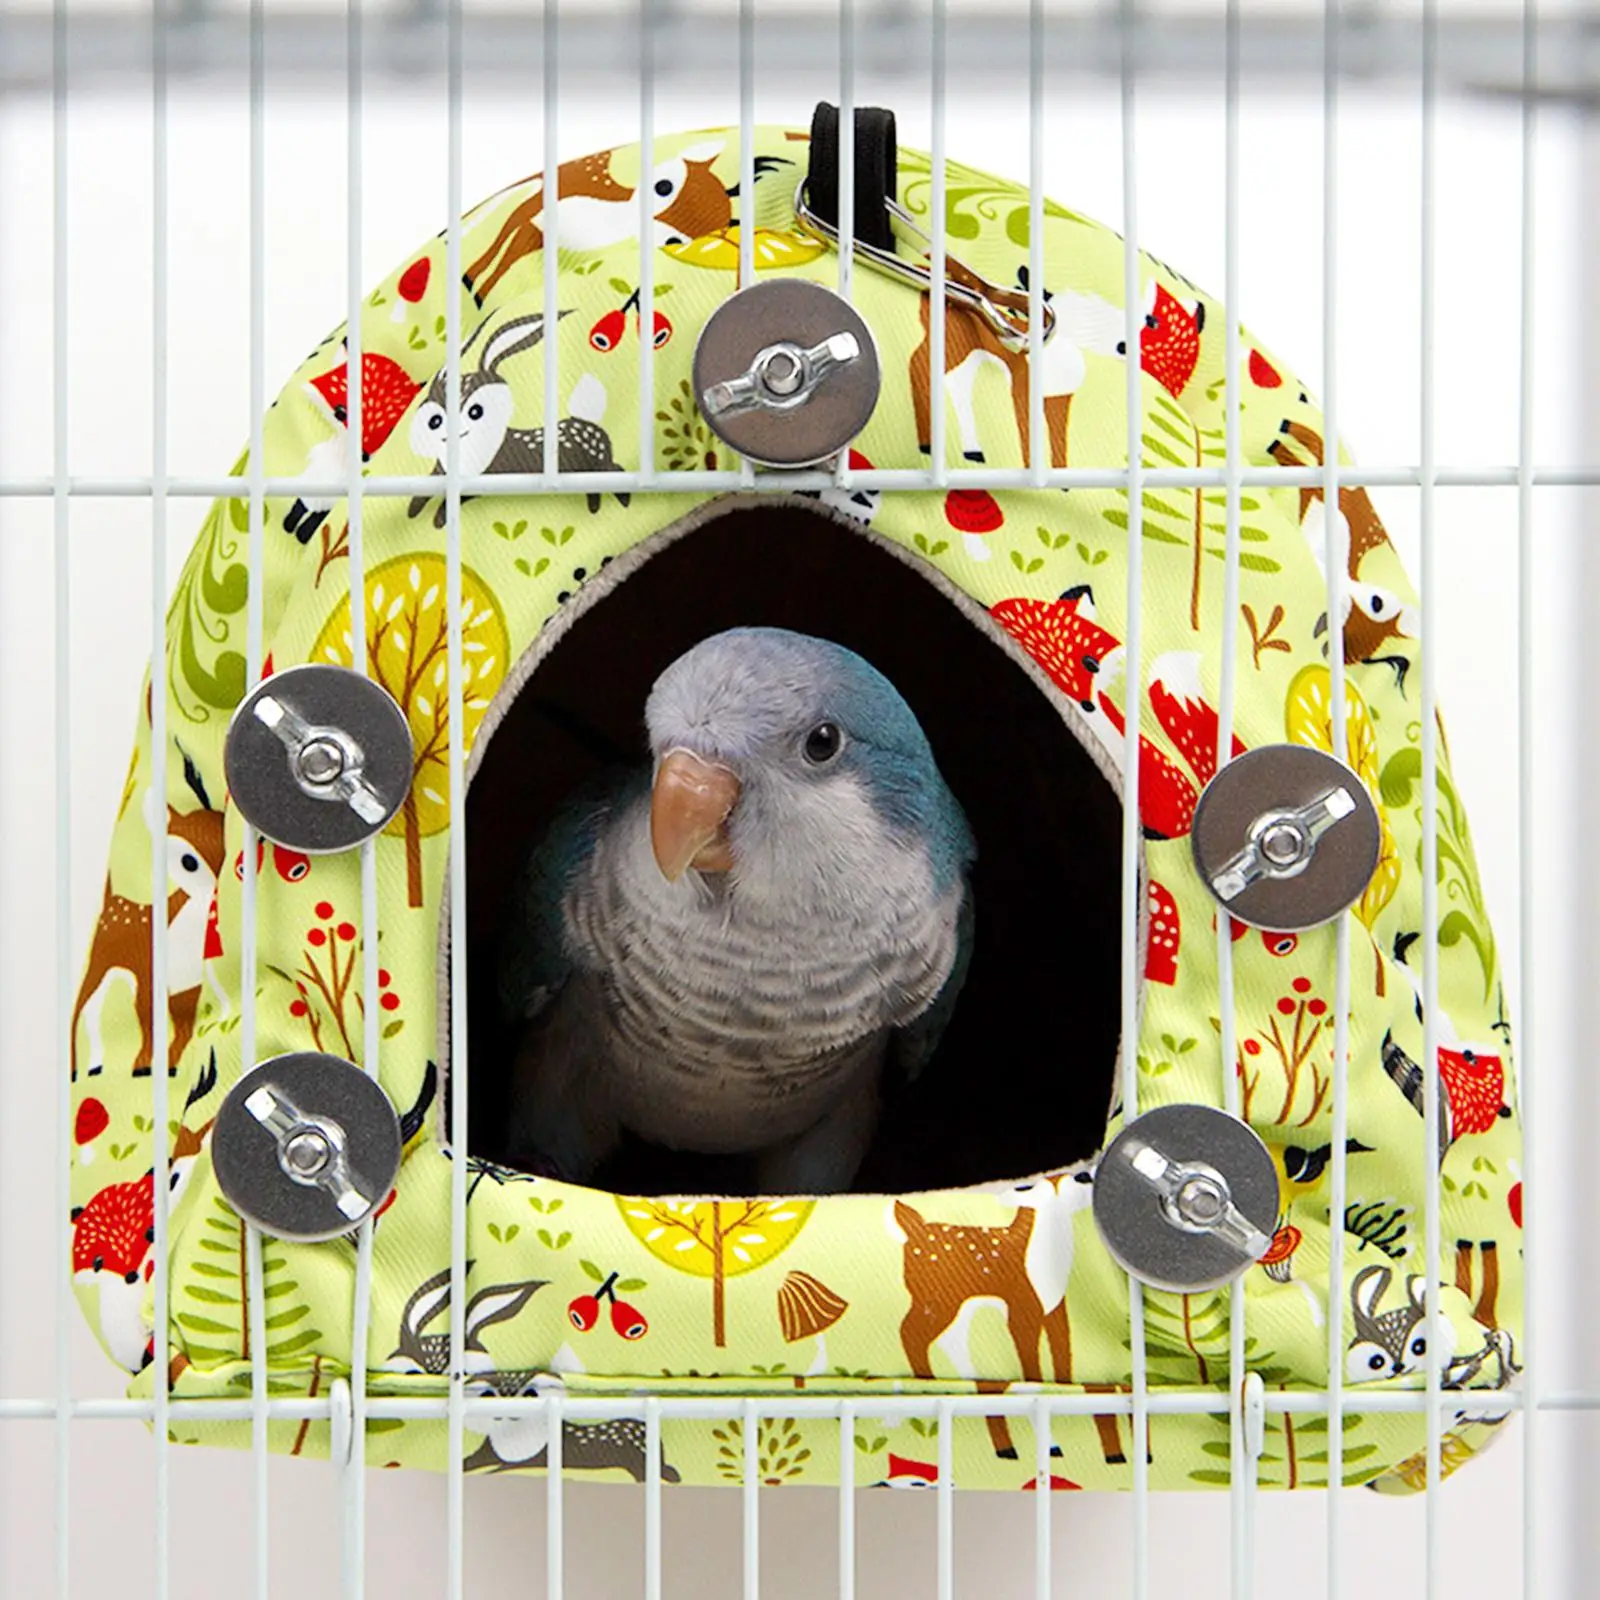 Warm Parrot Cage Hammock Cage Accessory Bird Hanging Nest for Finches Parrot